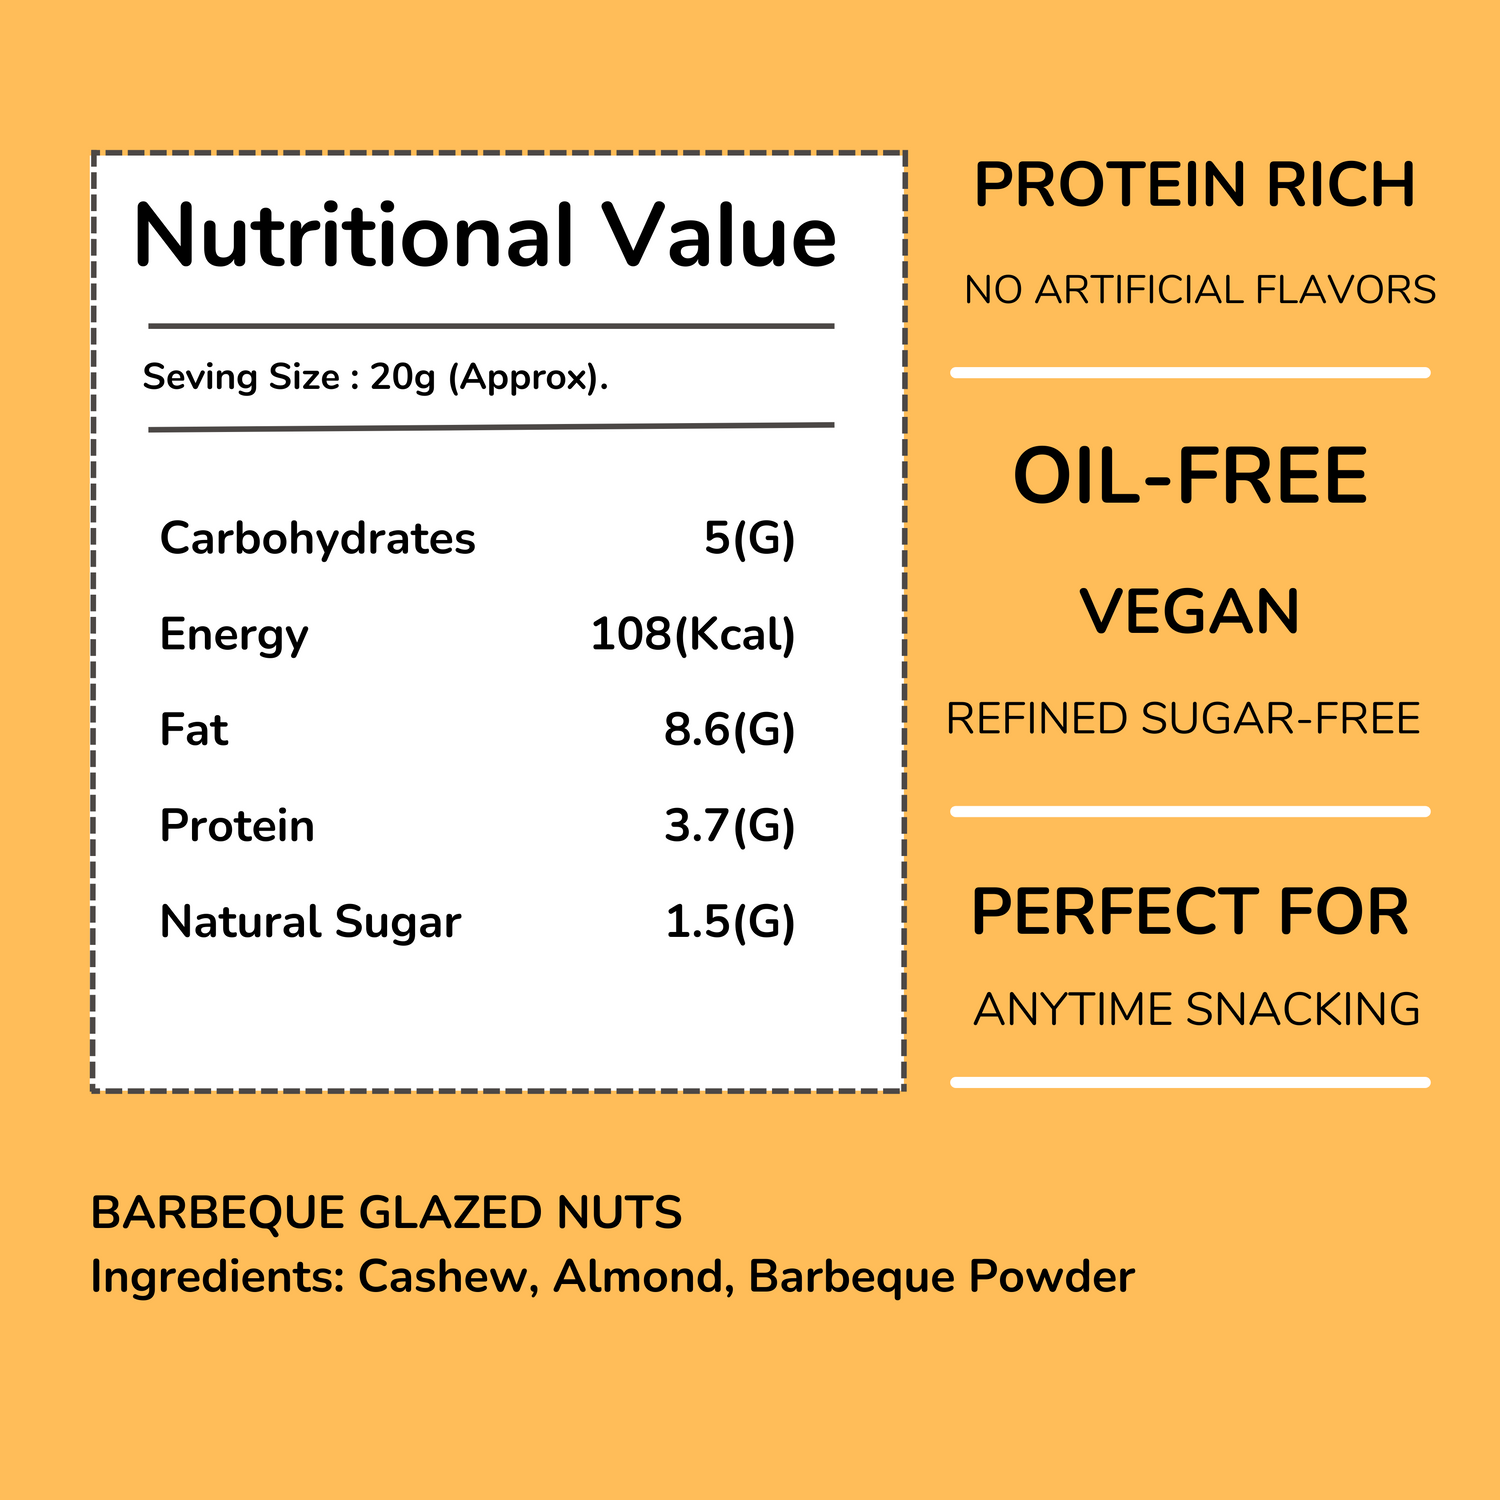 Barbeque Glazed Nuts nutritional value info